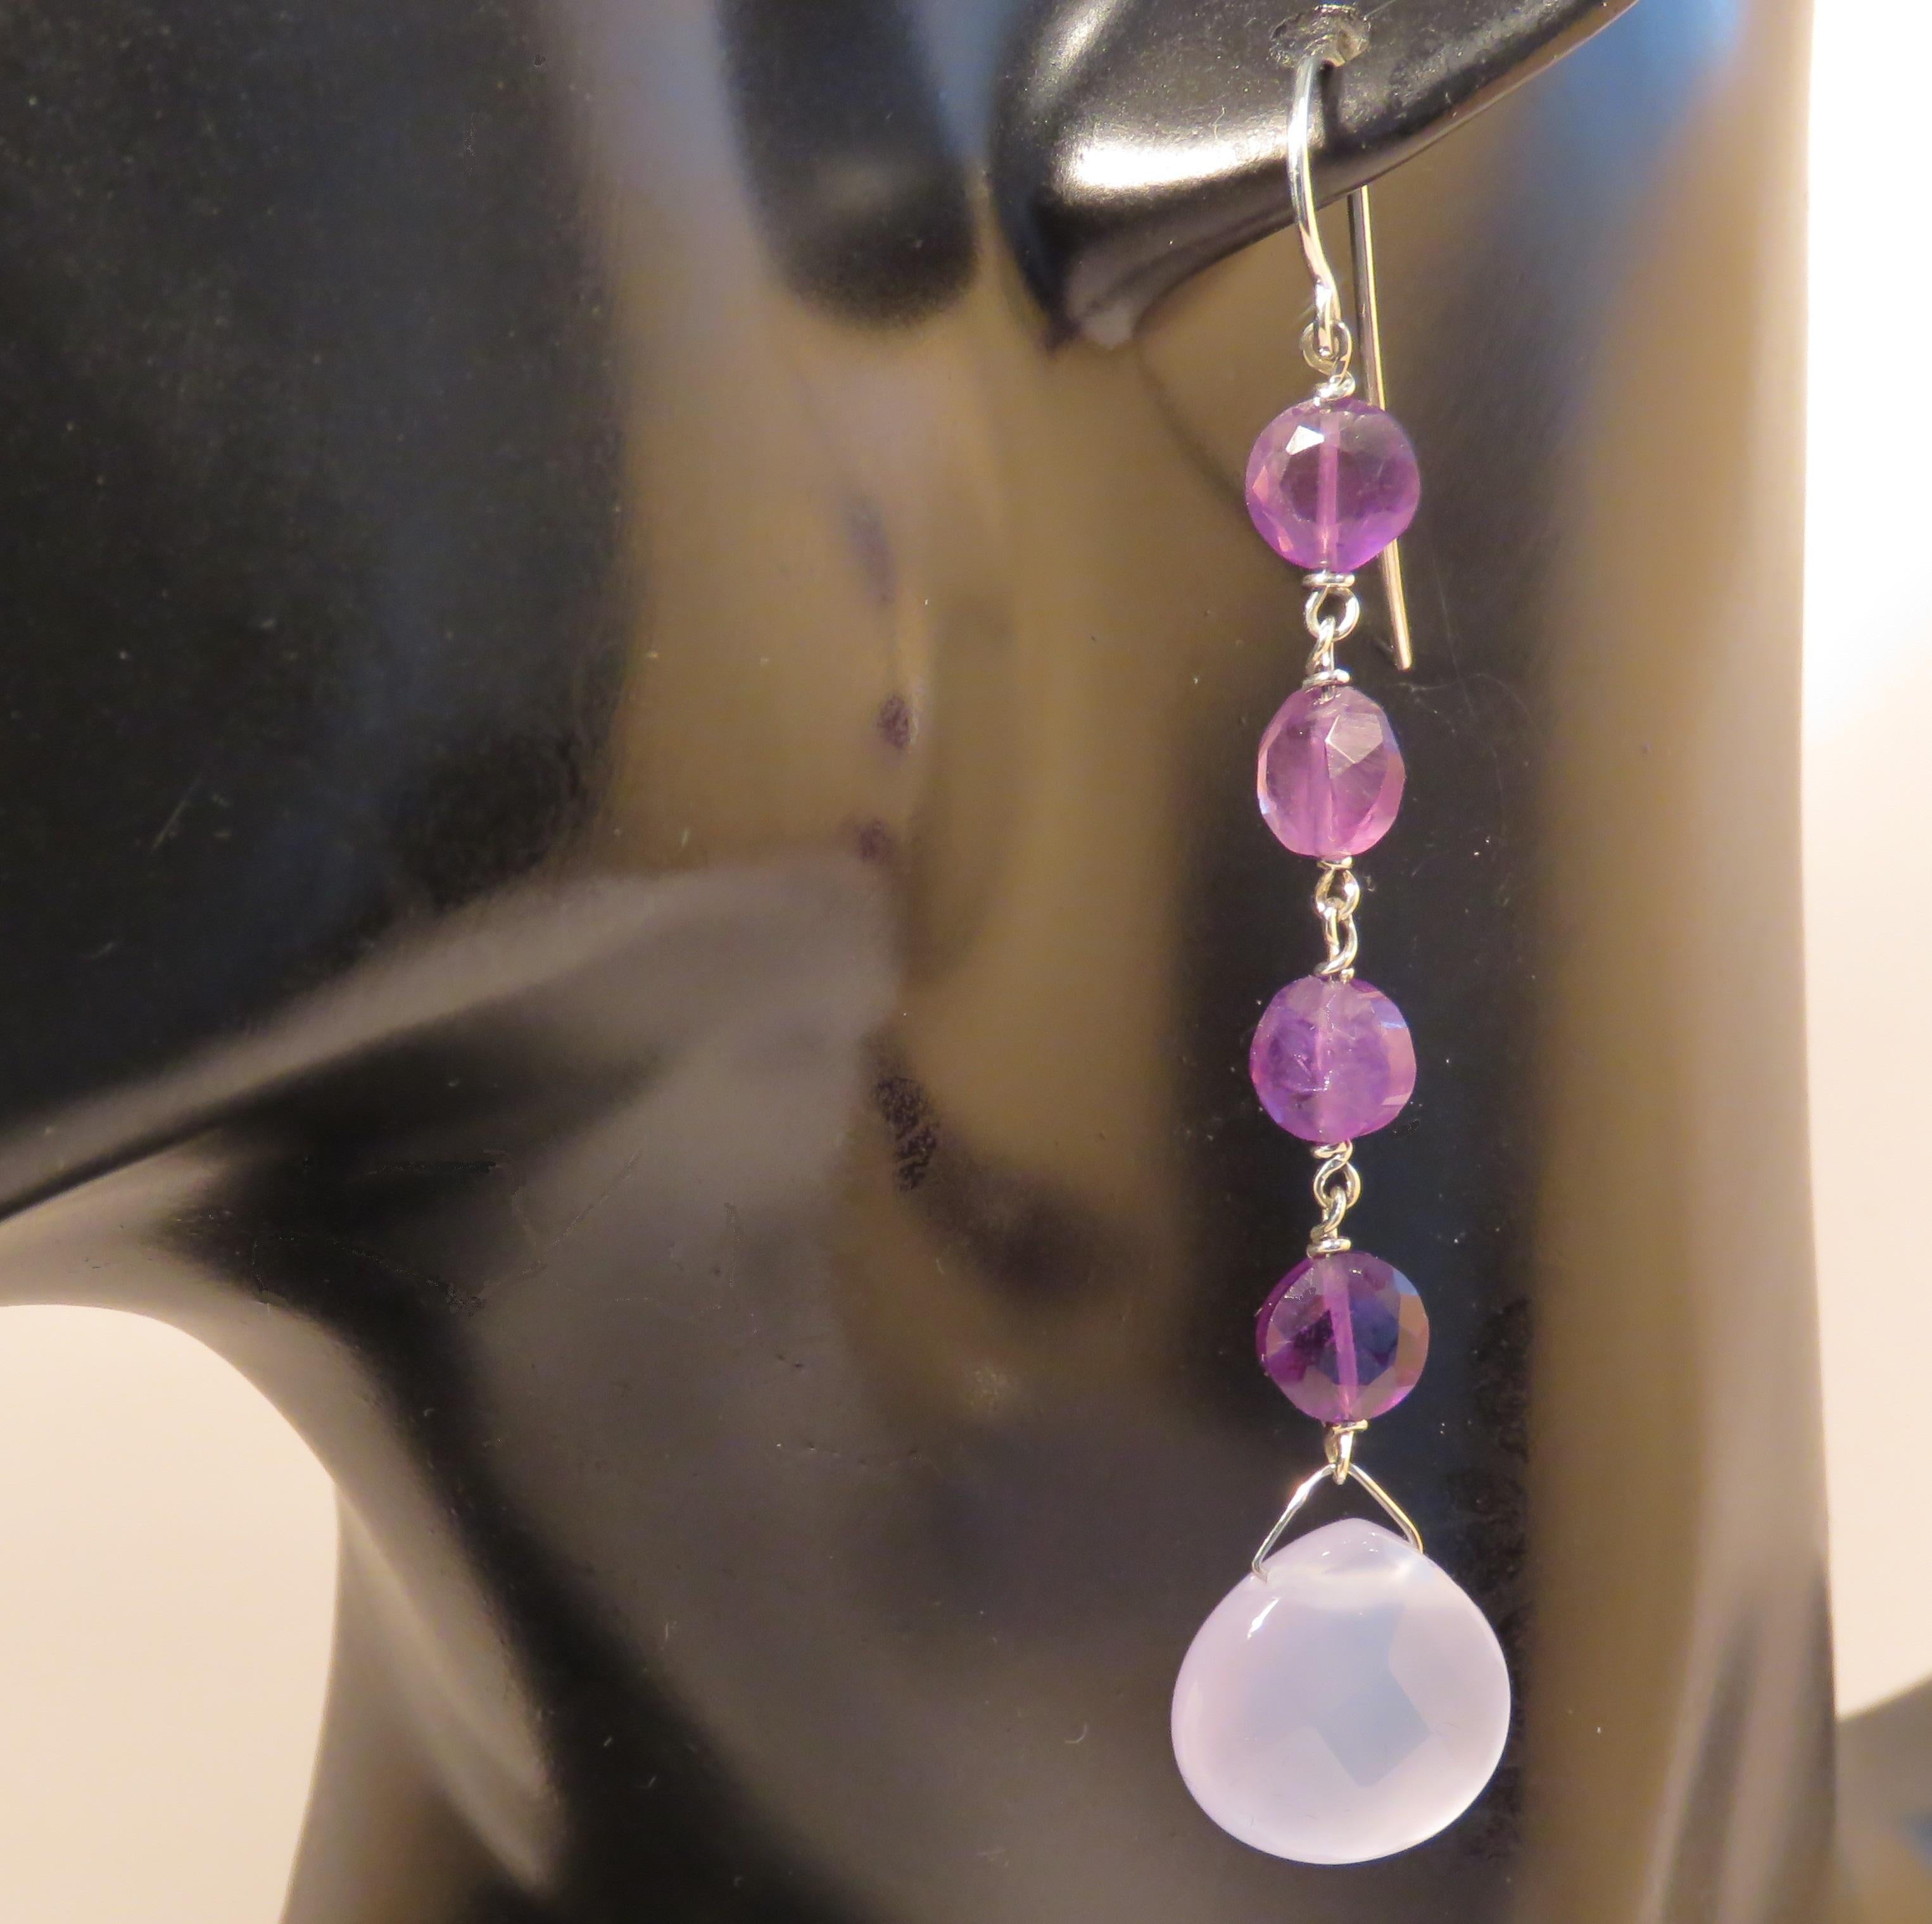 Beautiful dangle earrings with natural faceted chalcedony and faceted amethyst handcrafted in Italy by Botta Gioielli in 9 karat white gold. The total length of each earring is 70 mm / 2.755 inches. They are marked with the Italian Gold Mark 375 and